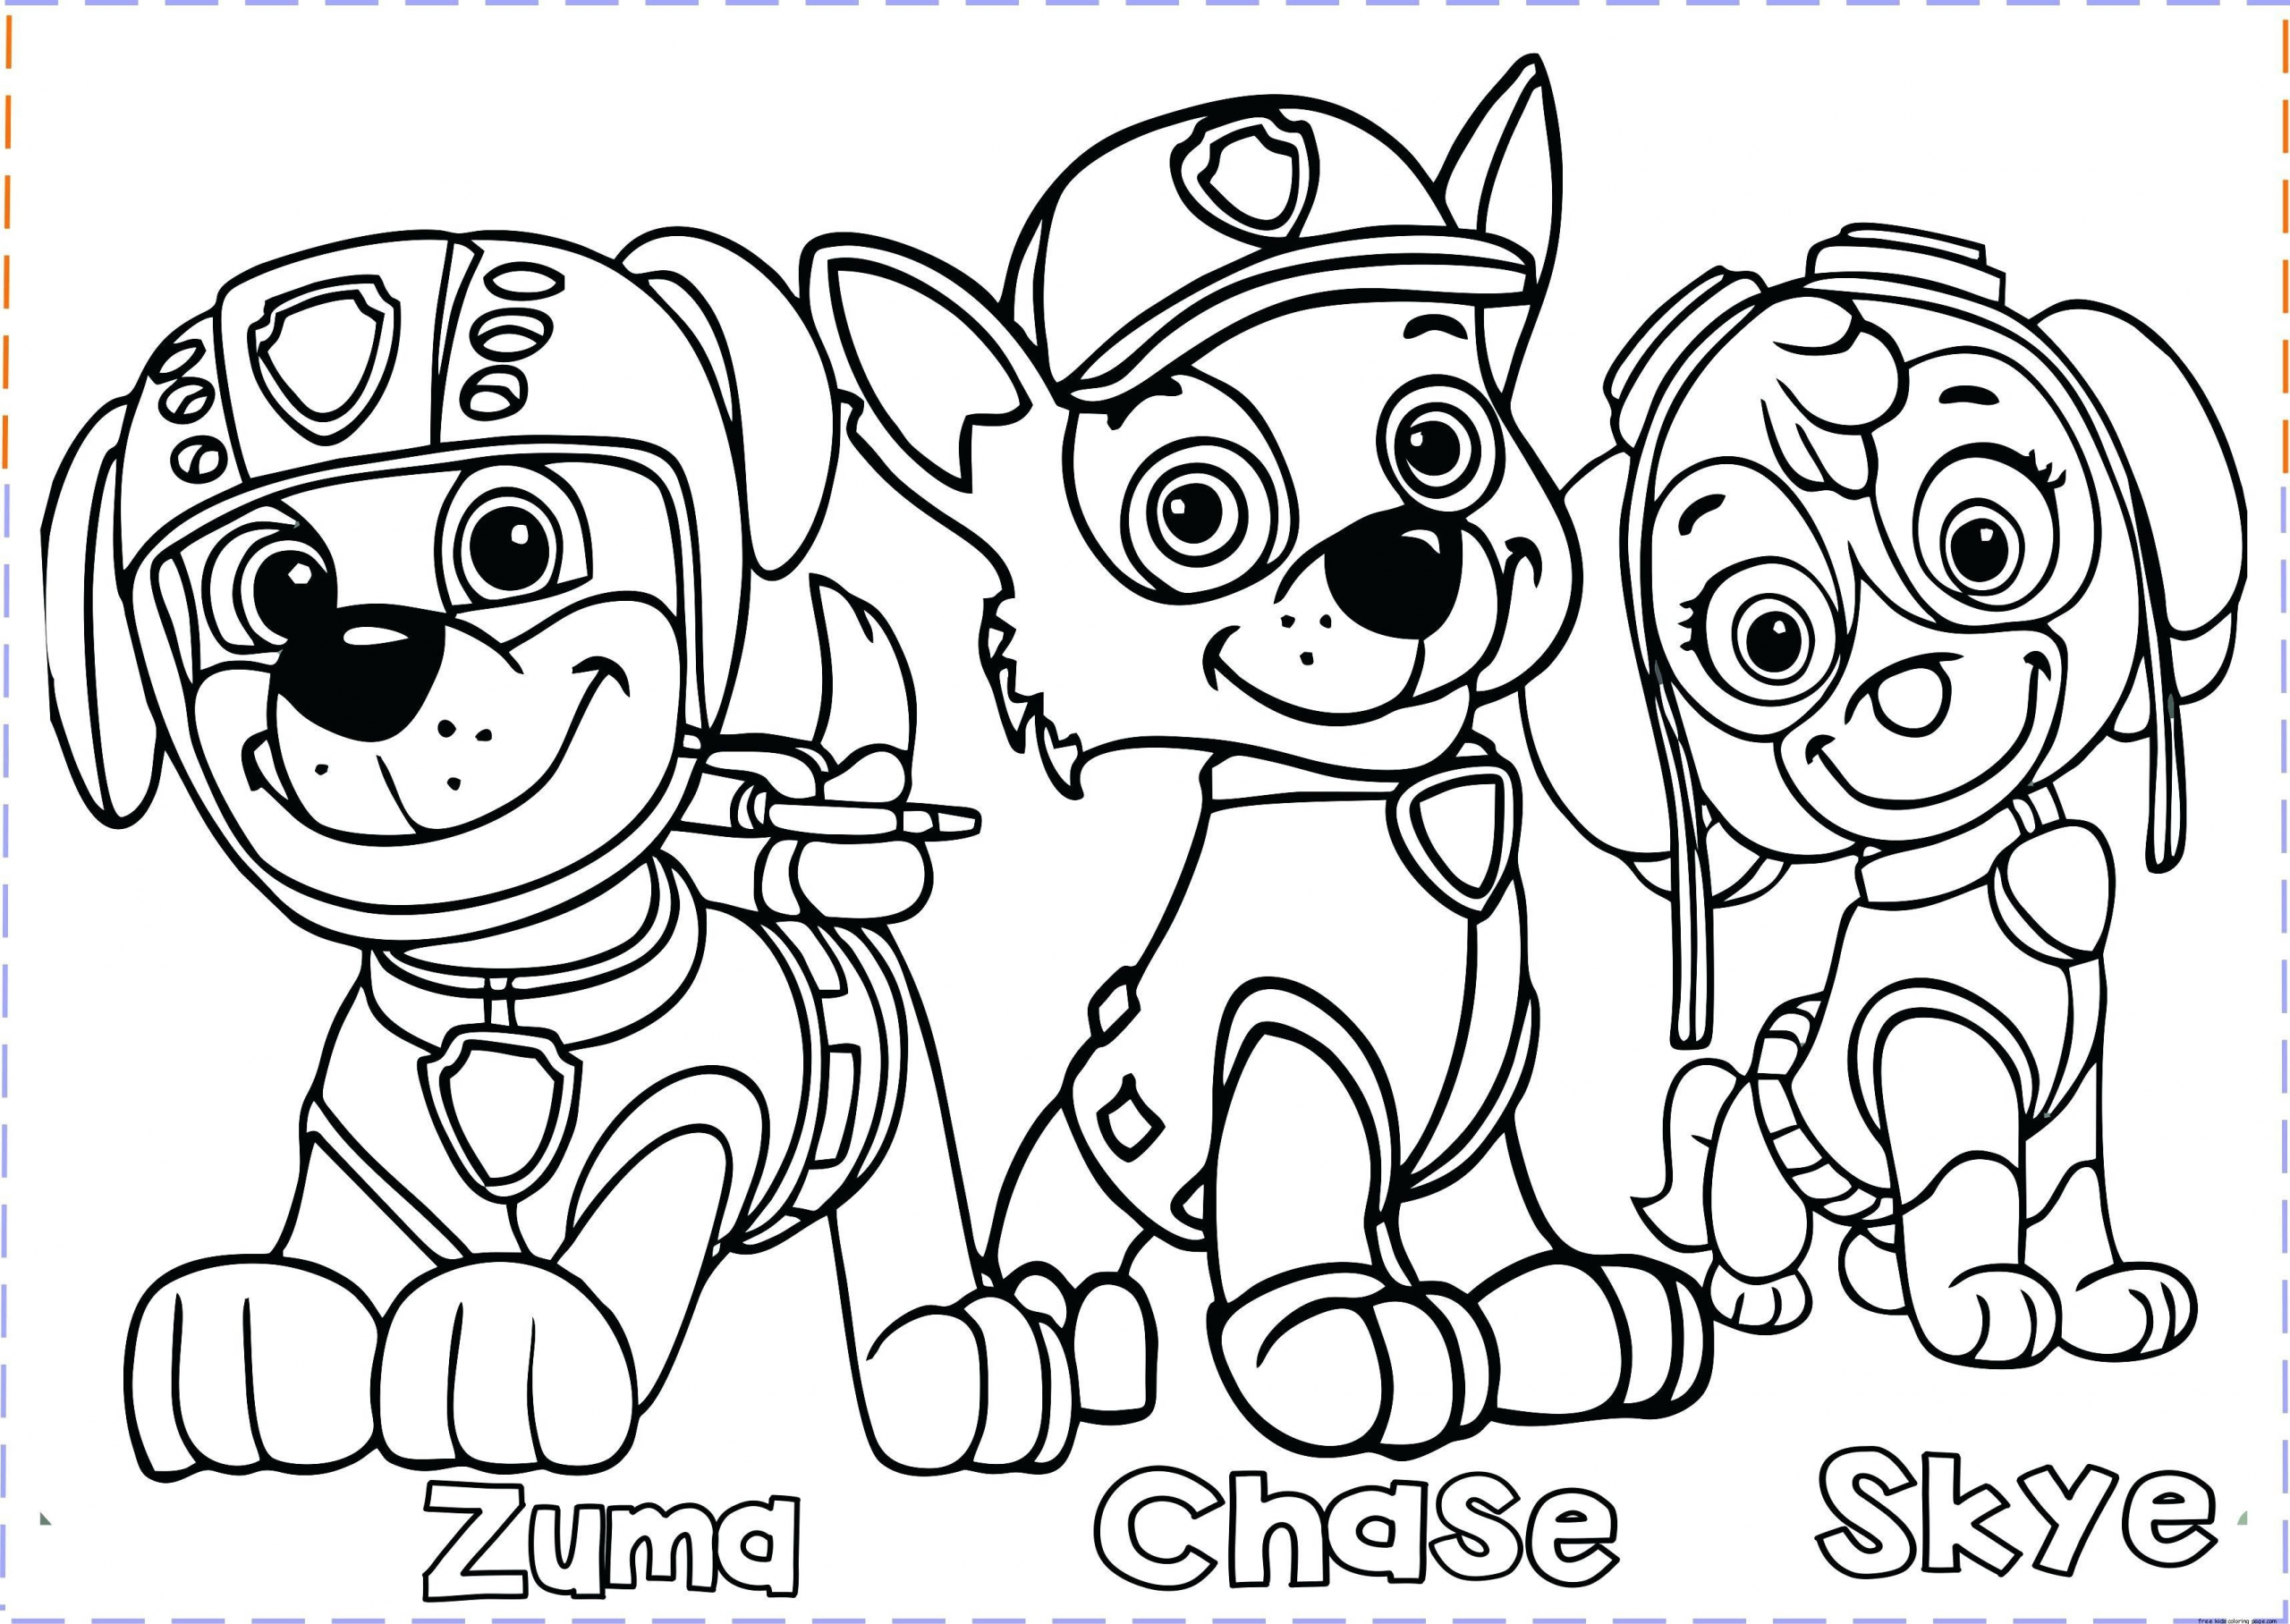 Coloring Pages : Paw Patrolloring Pages Tracker Ryder And Chase ...